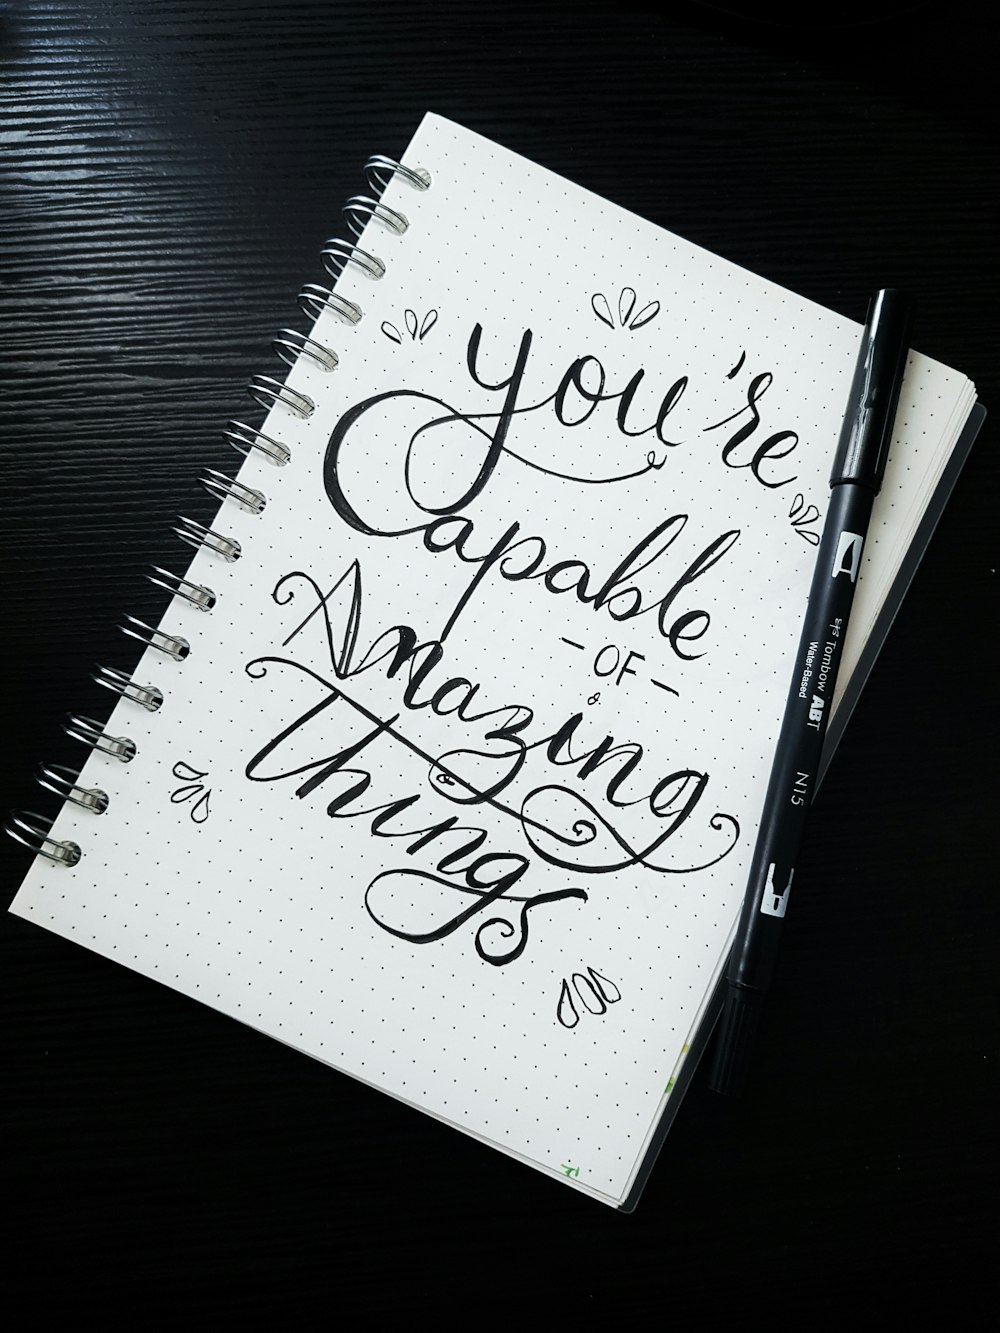 Pen on You're able of amazing things spiral notebook